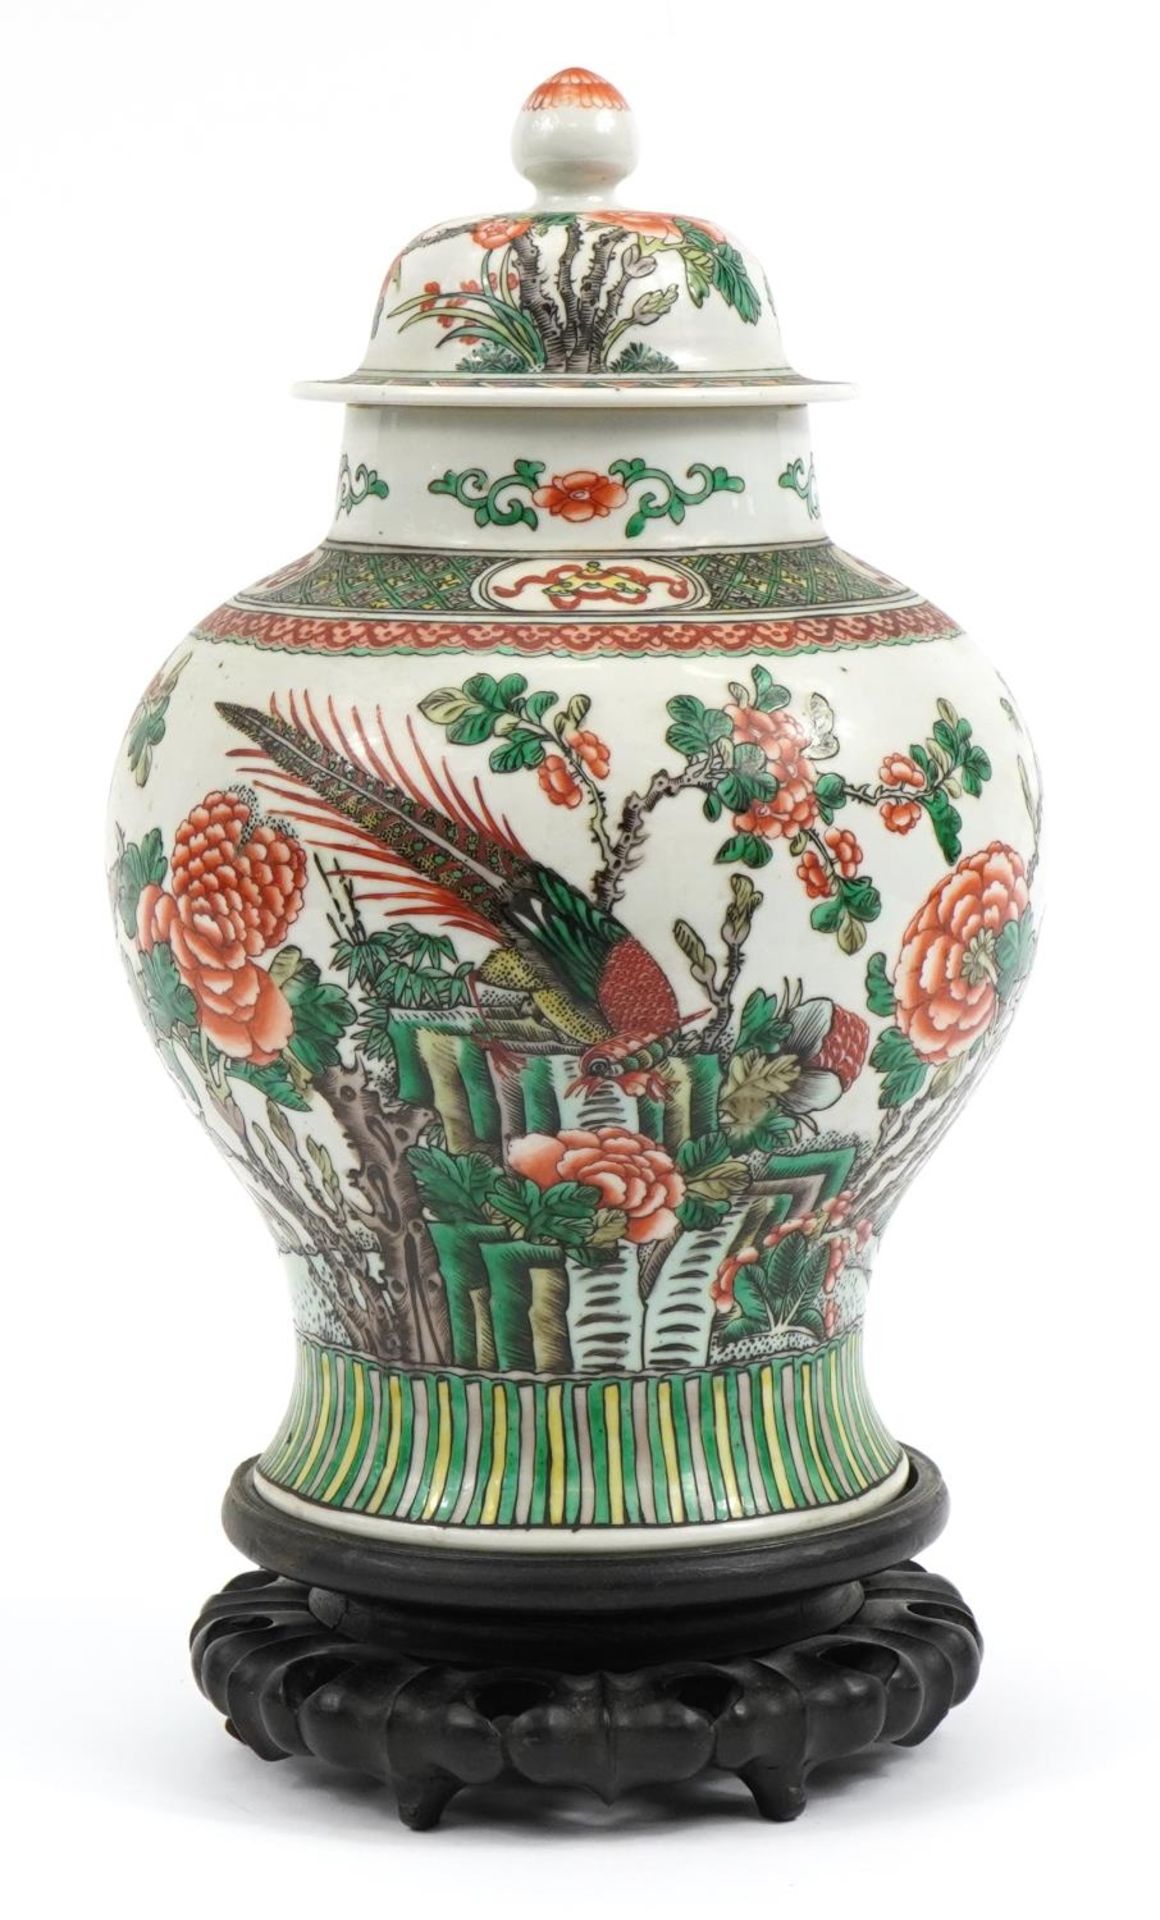 Chinese porcelain baluster vase and cover raised on carved hardwood stand, hand painted in the